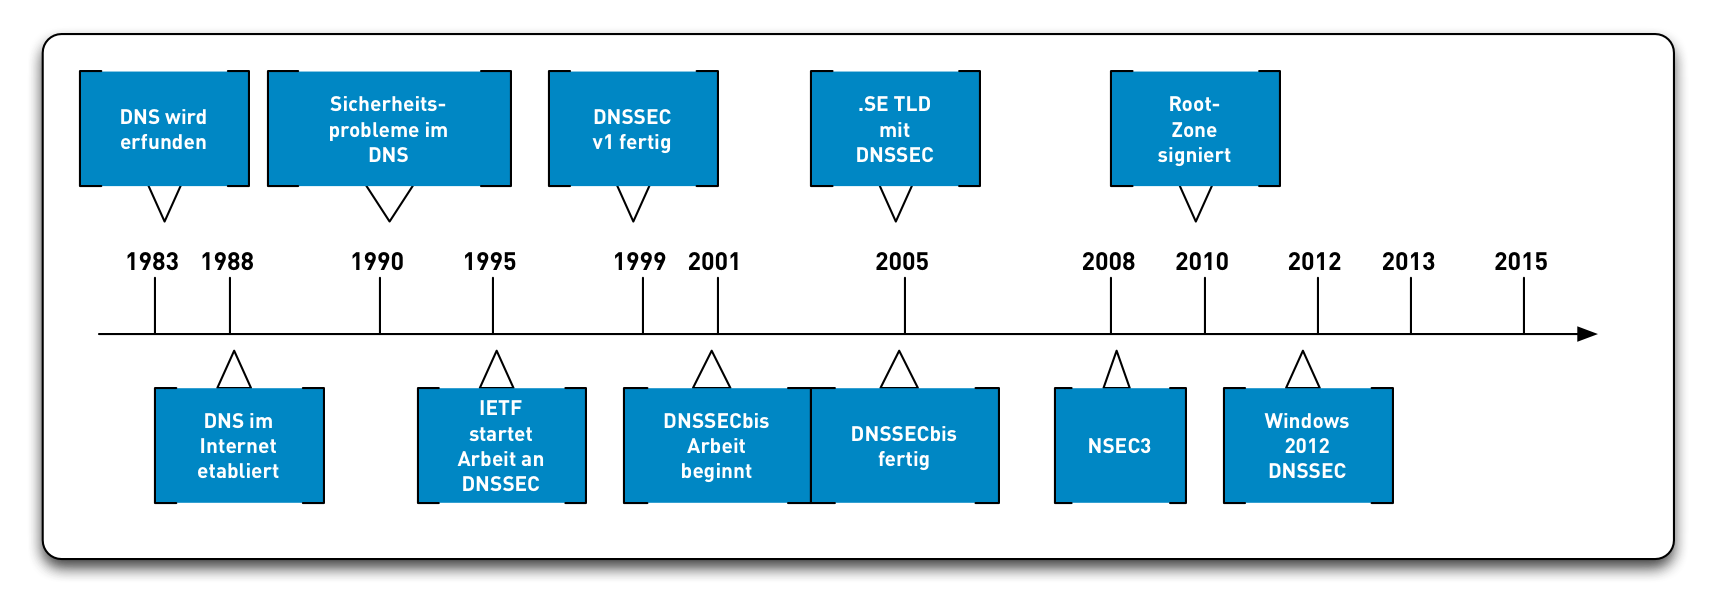 DNSSEC-History12.png